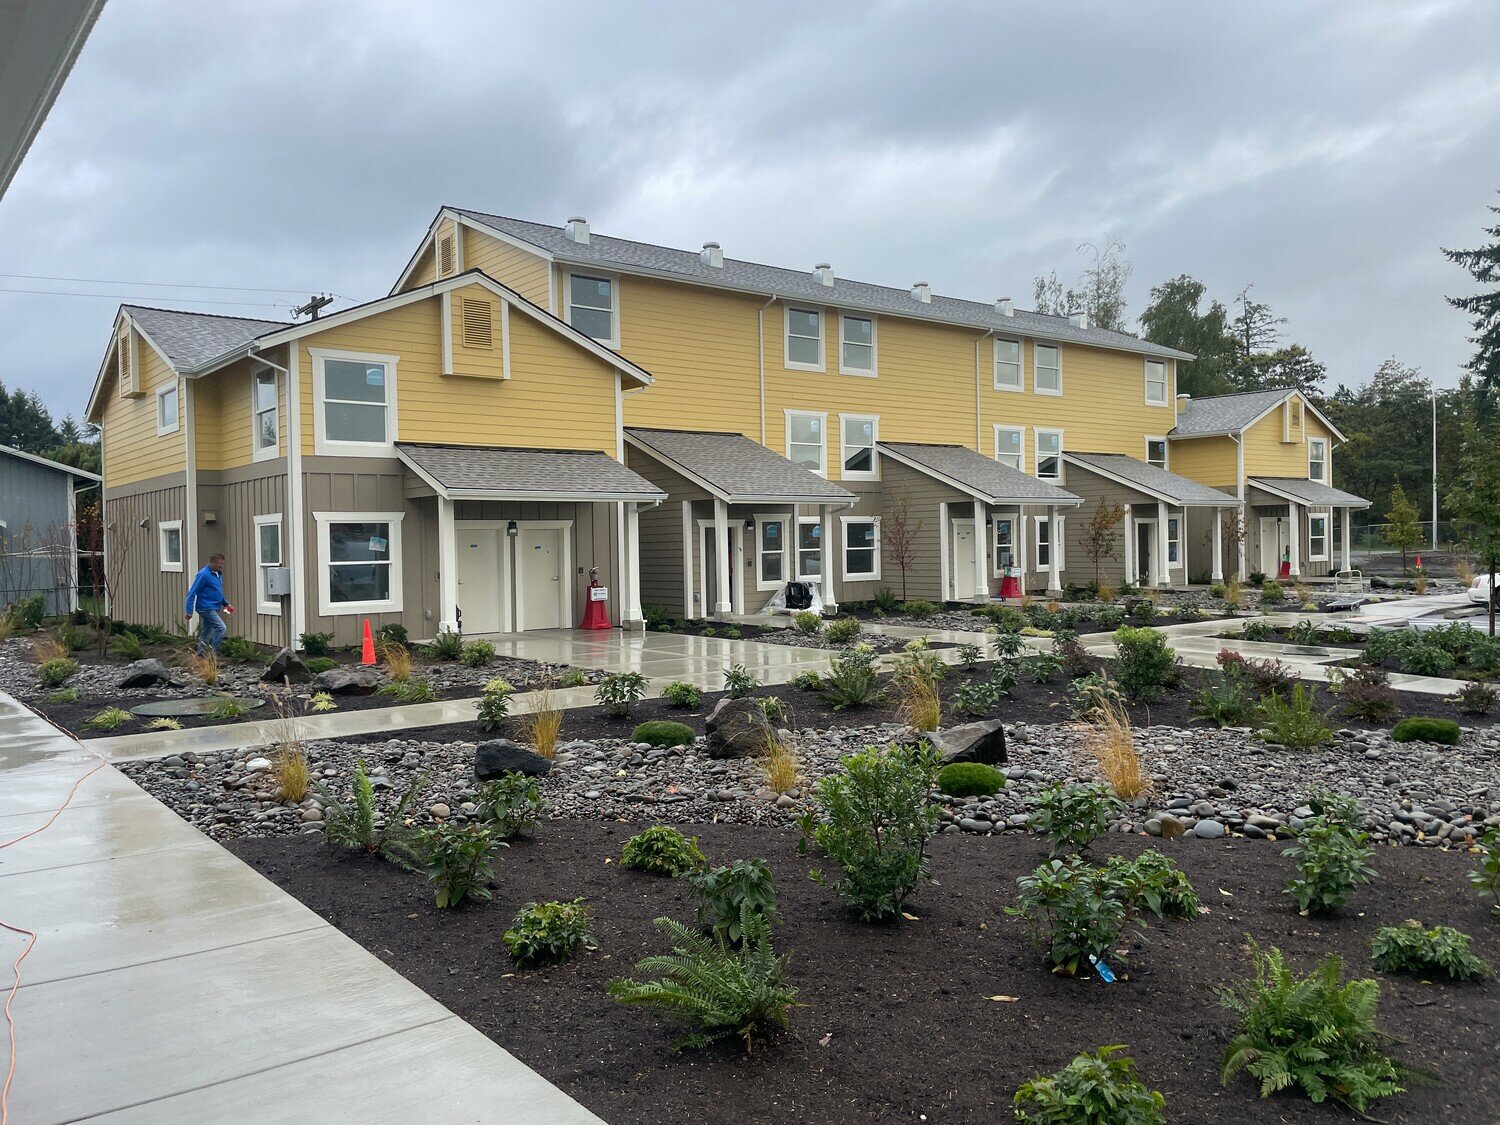 Reliable Enterprises, the Centralia School District and community partners last week announced the upcoming grand opening of the Reliable Homes II apartment complex in Centralia, housing aimed at serving students with families experiencing homelessness.